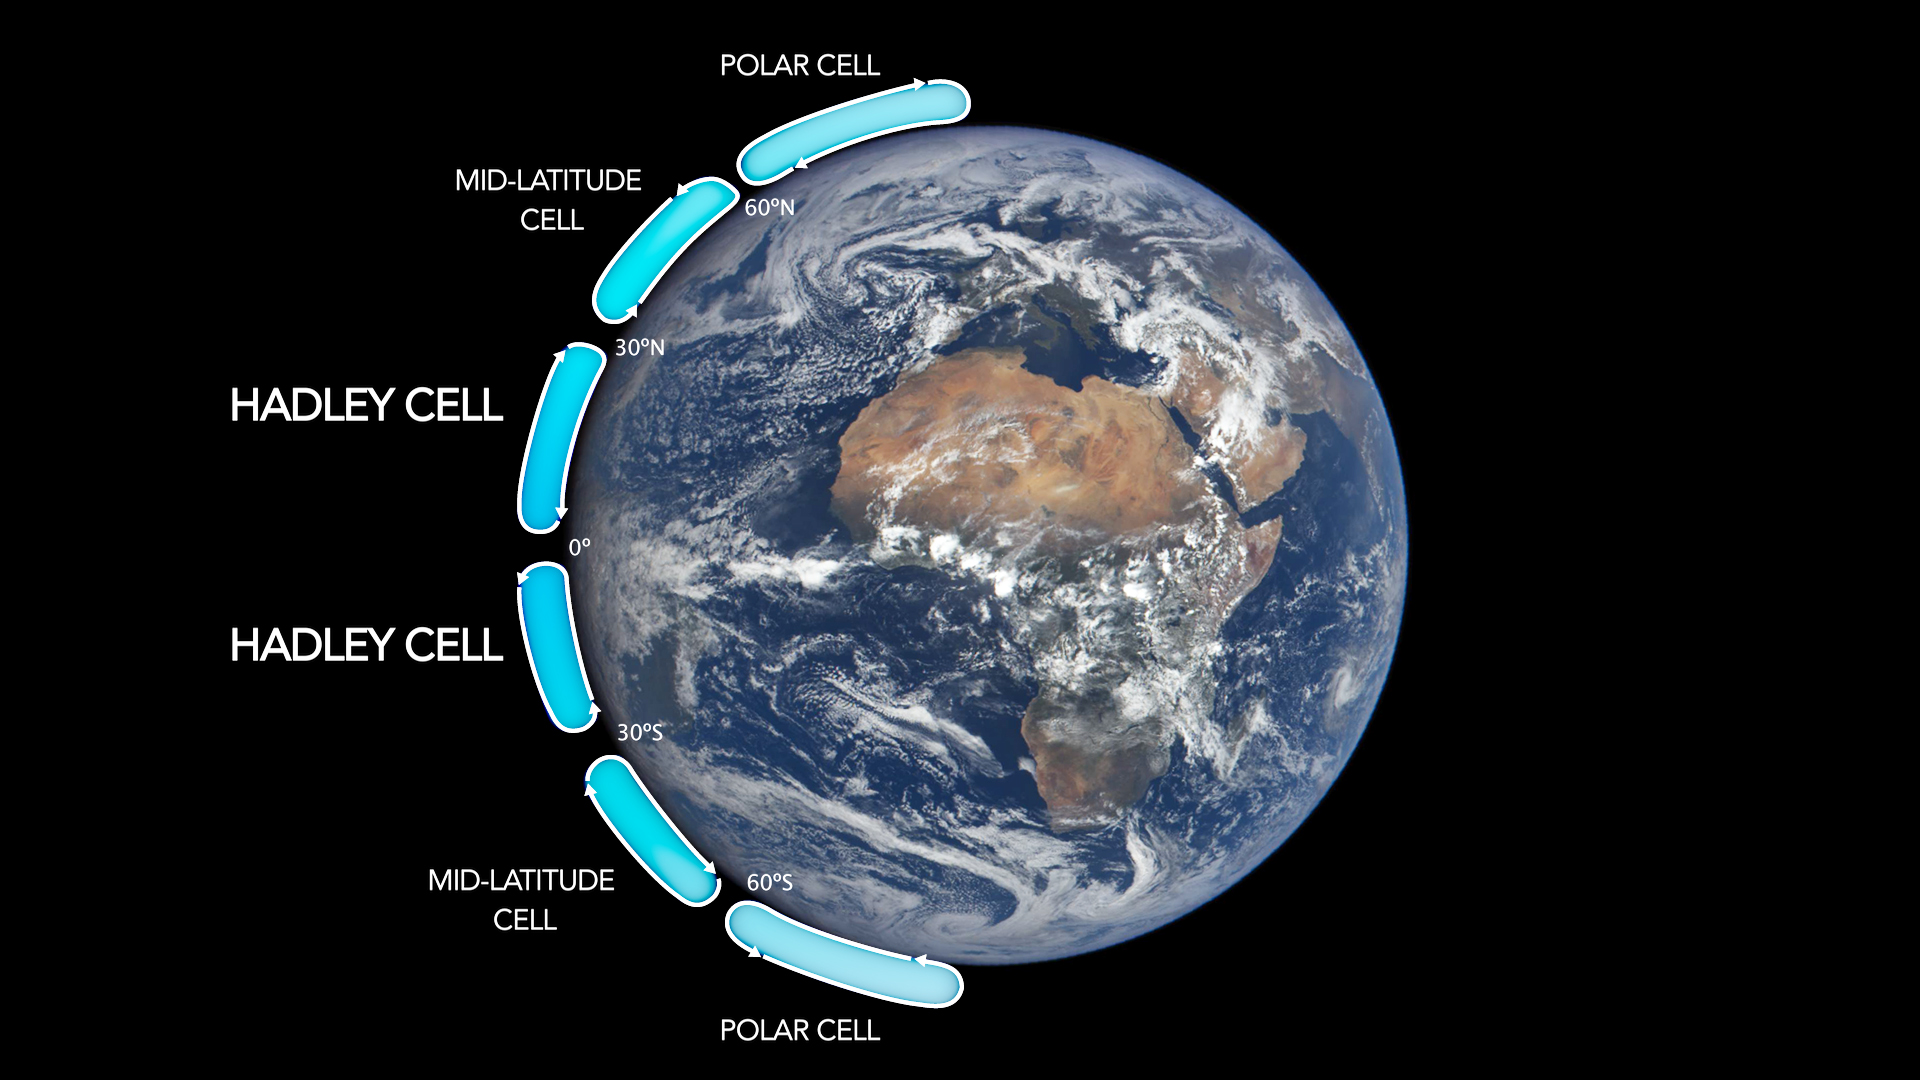 A picture of the Earth with different climate circulation cells labeled: Hadley cells, Ferrel cells, and Polar cells